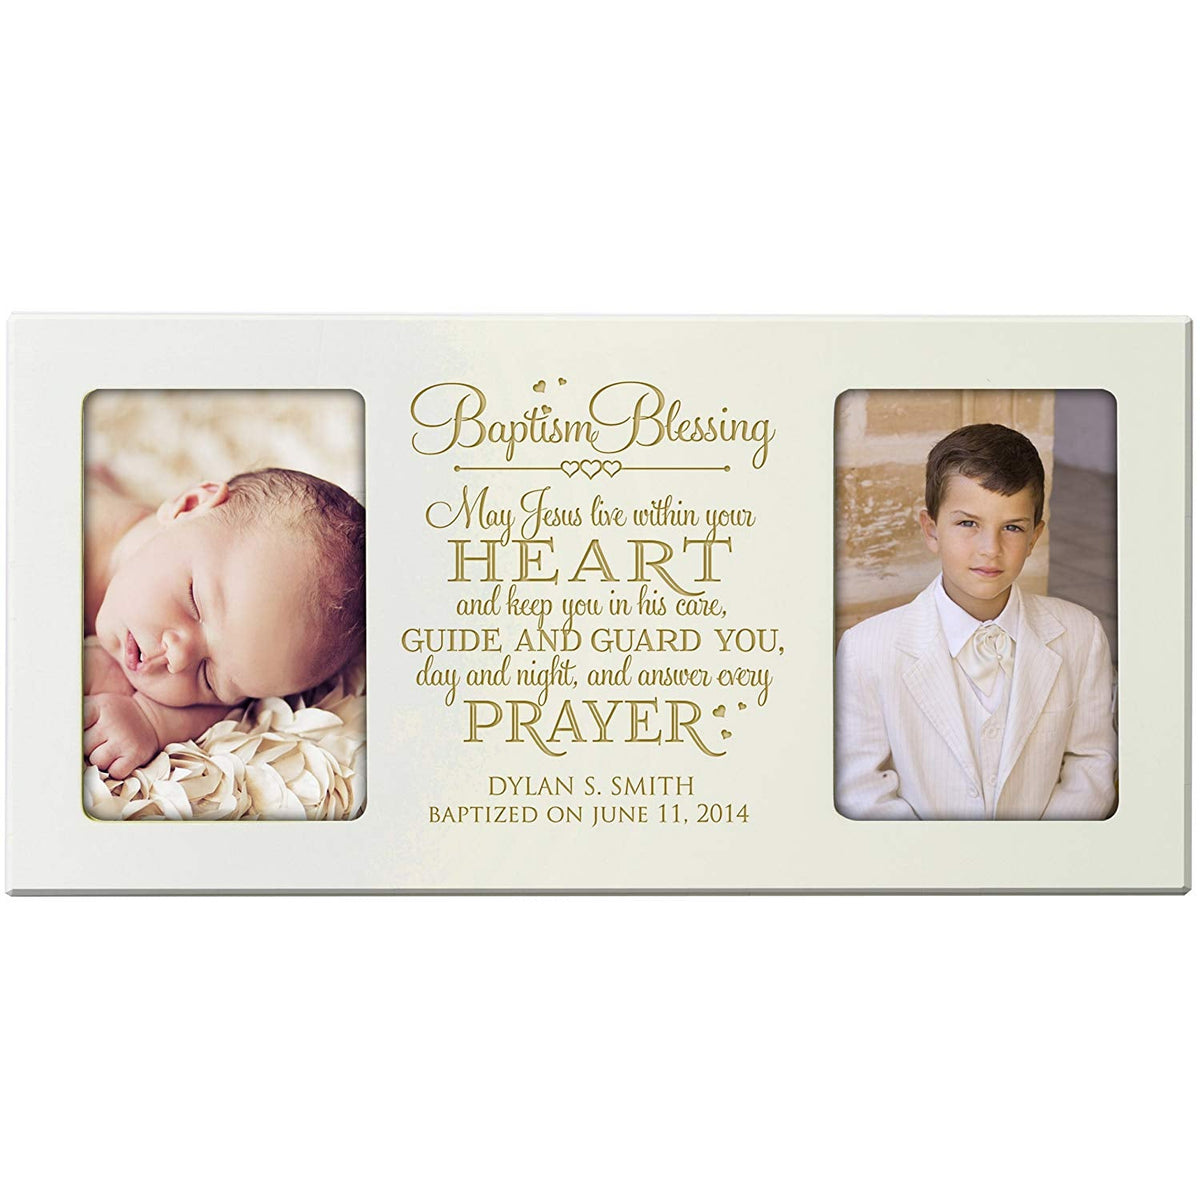 Personalized First Communion Photo Frame Gift &quot;Baptism Blessing&quot; - LifeSong Milestones